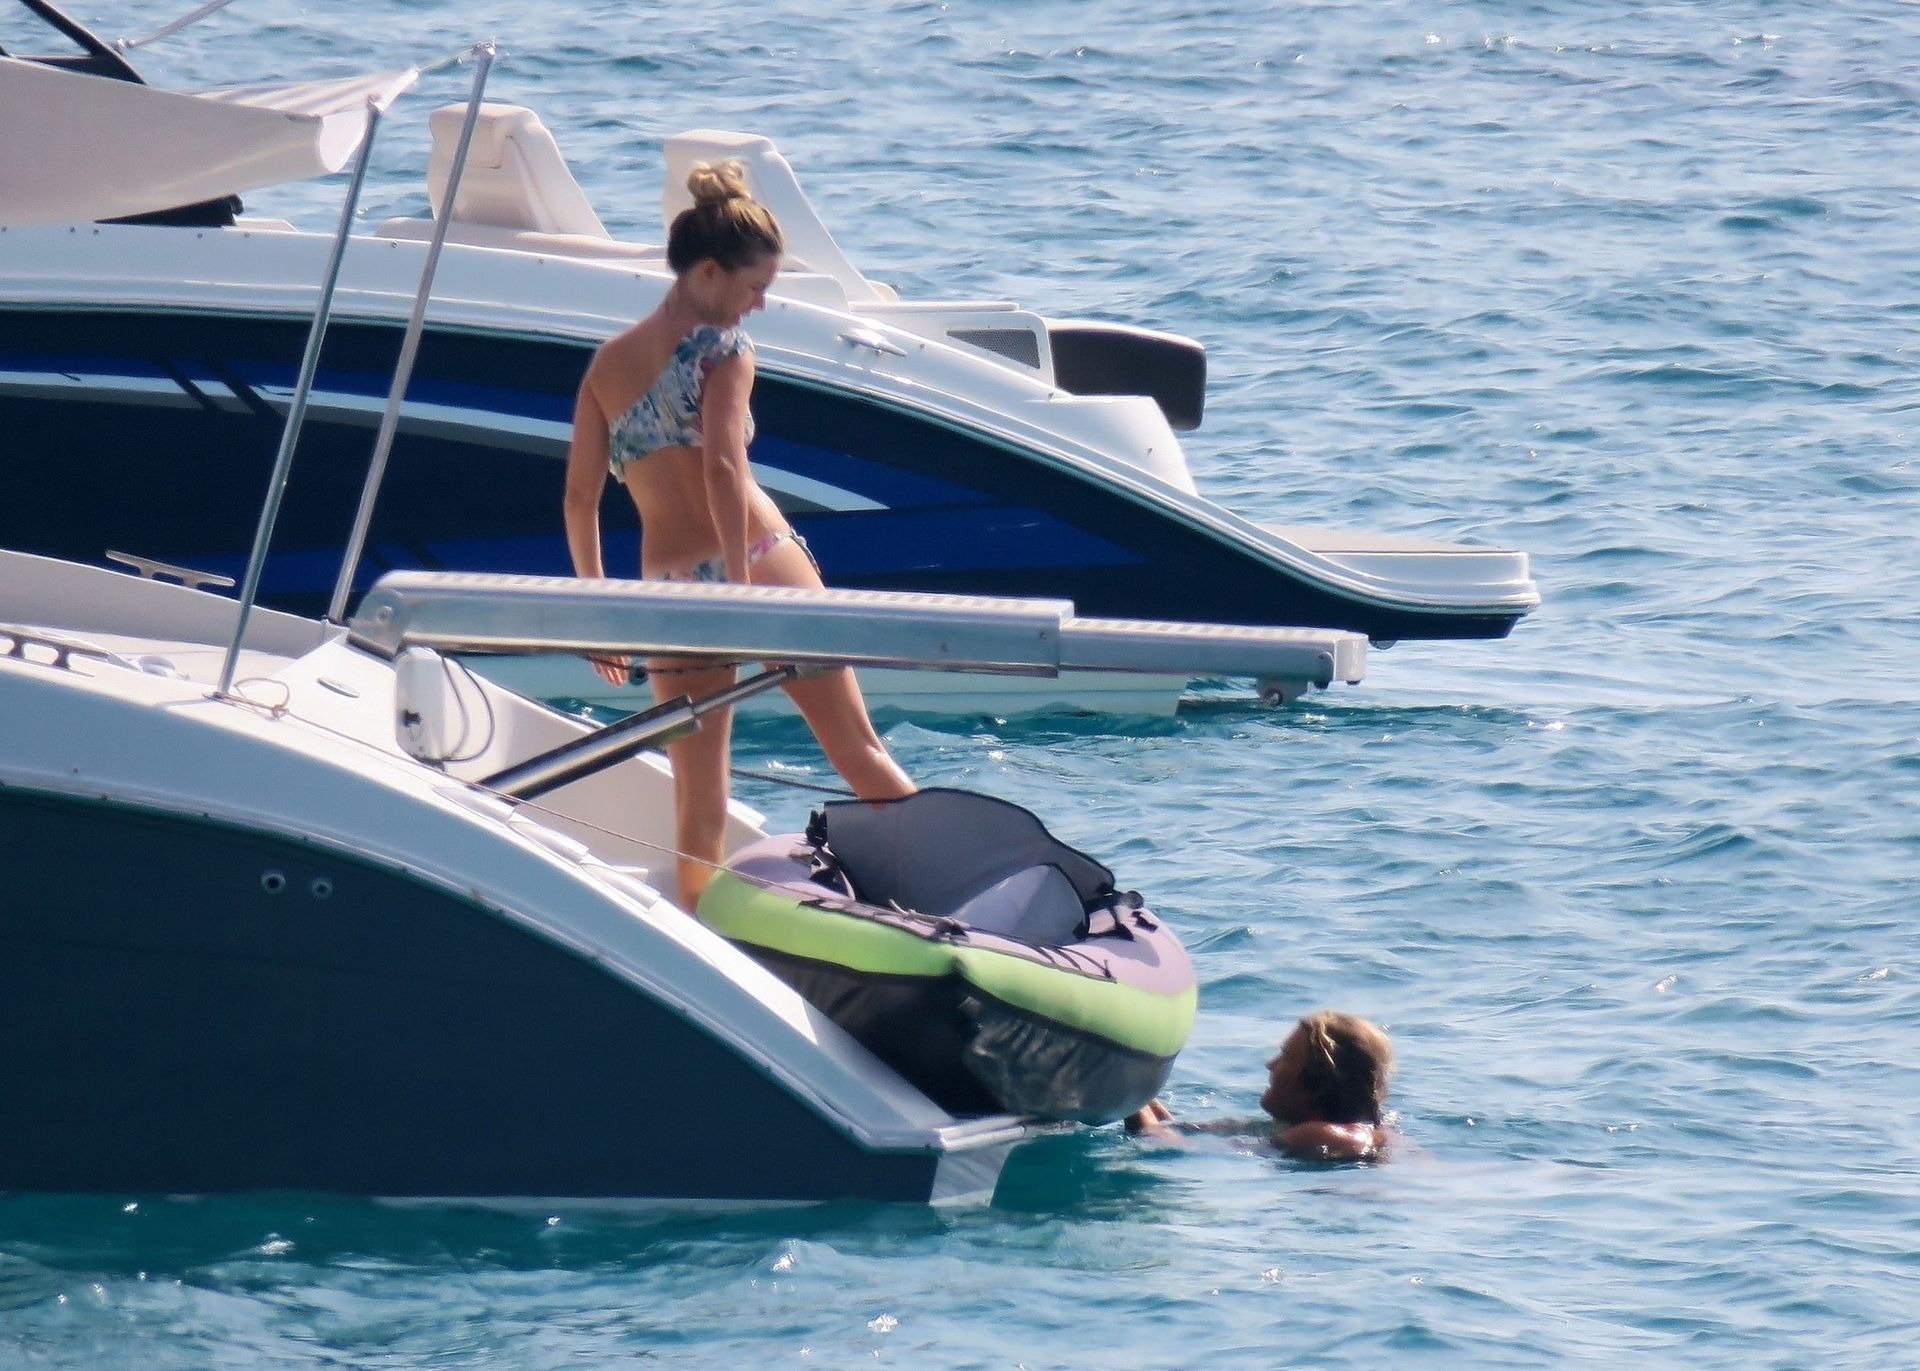 Nico Rosberg Packs on the PDA with Vivian Sibold in Formentera (53 Photos)